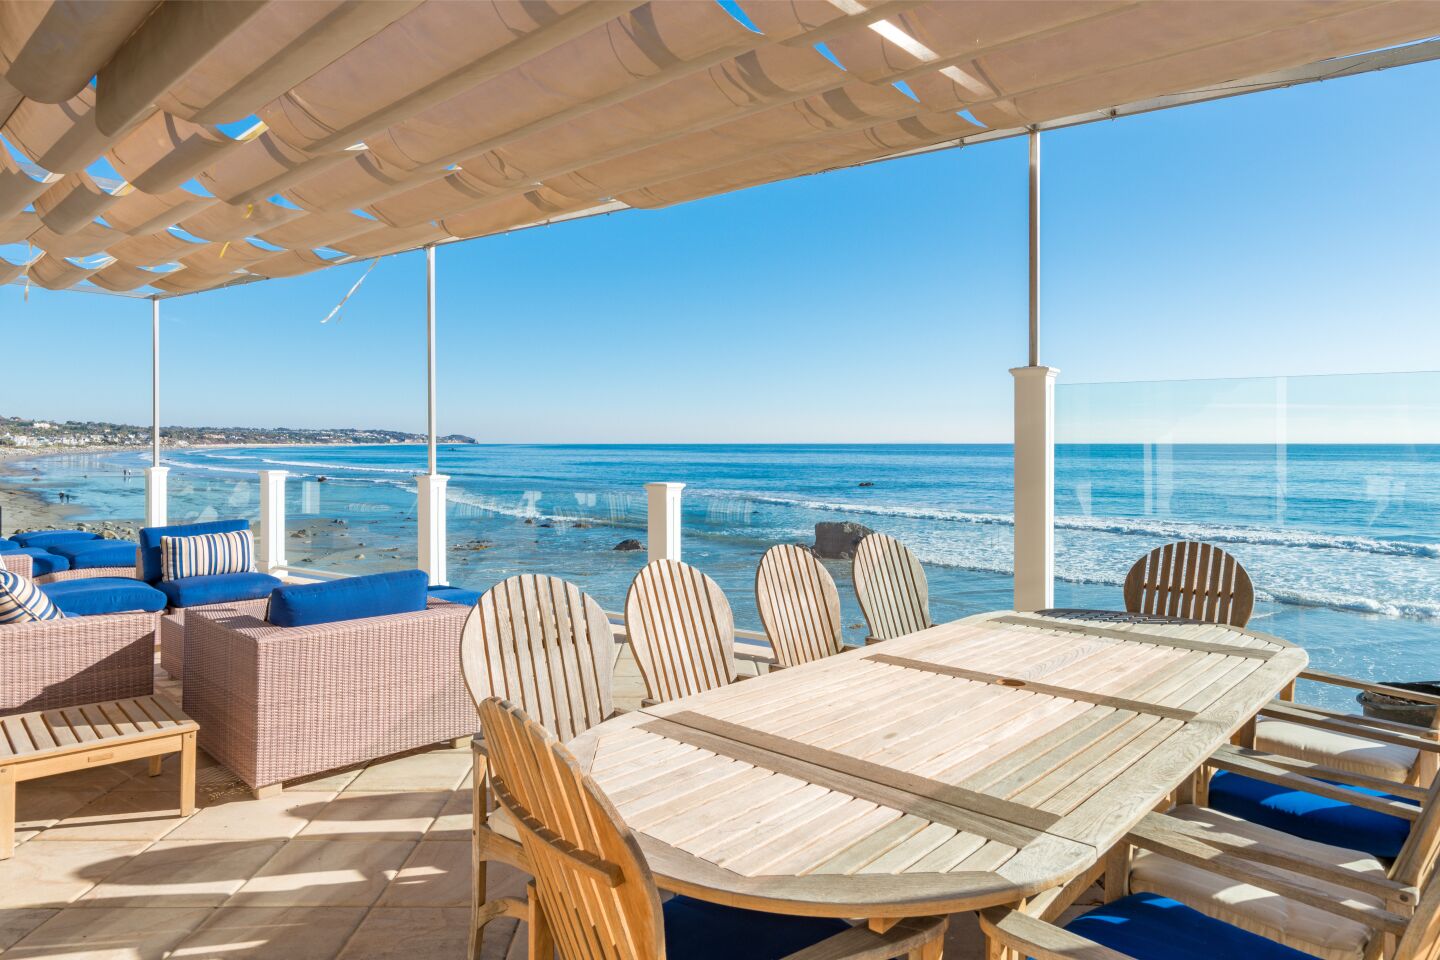 The covered dining deck has tables and chairs and an ocean view.